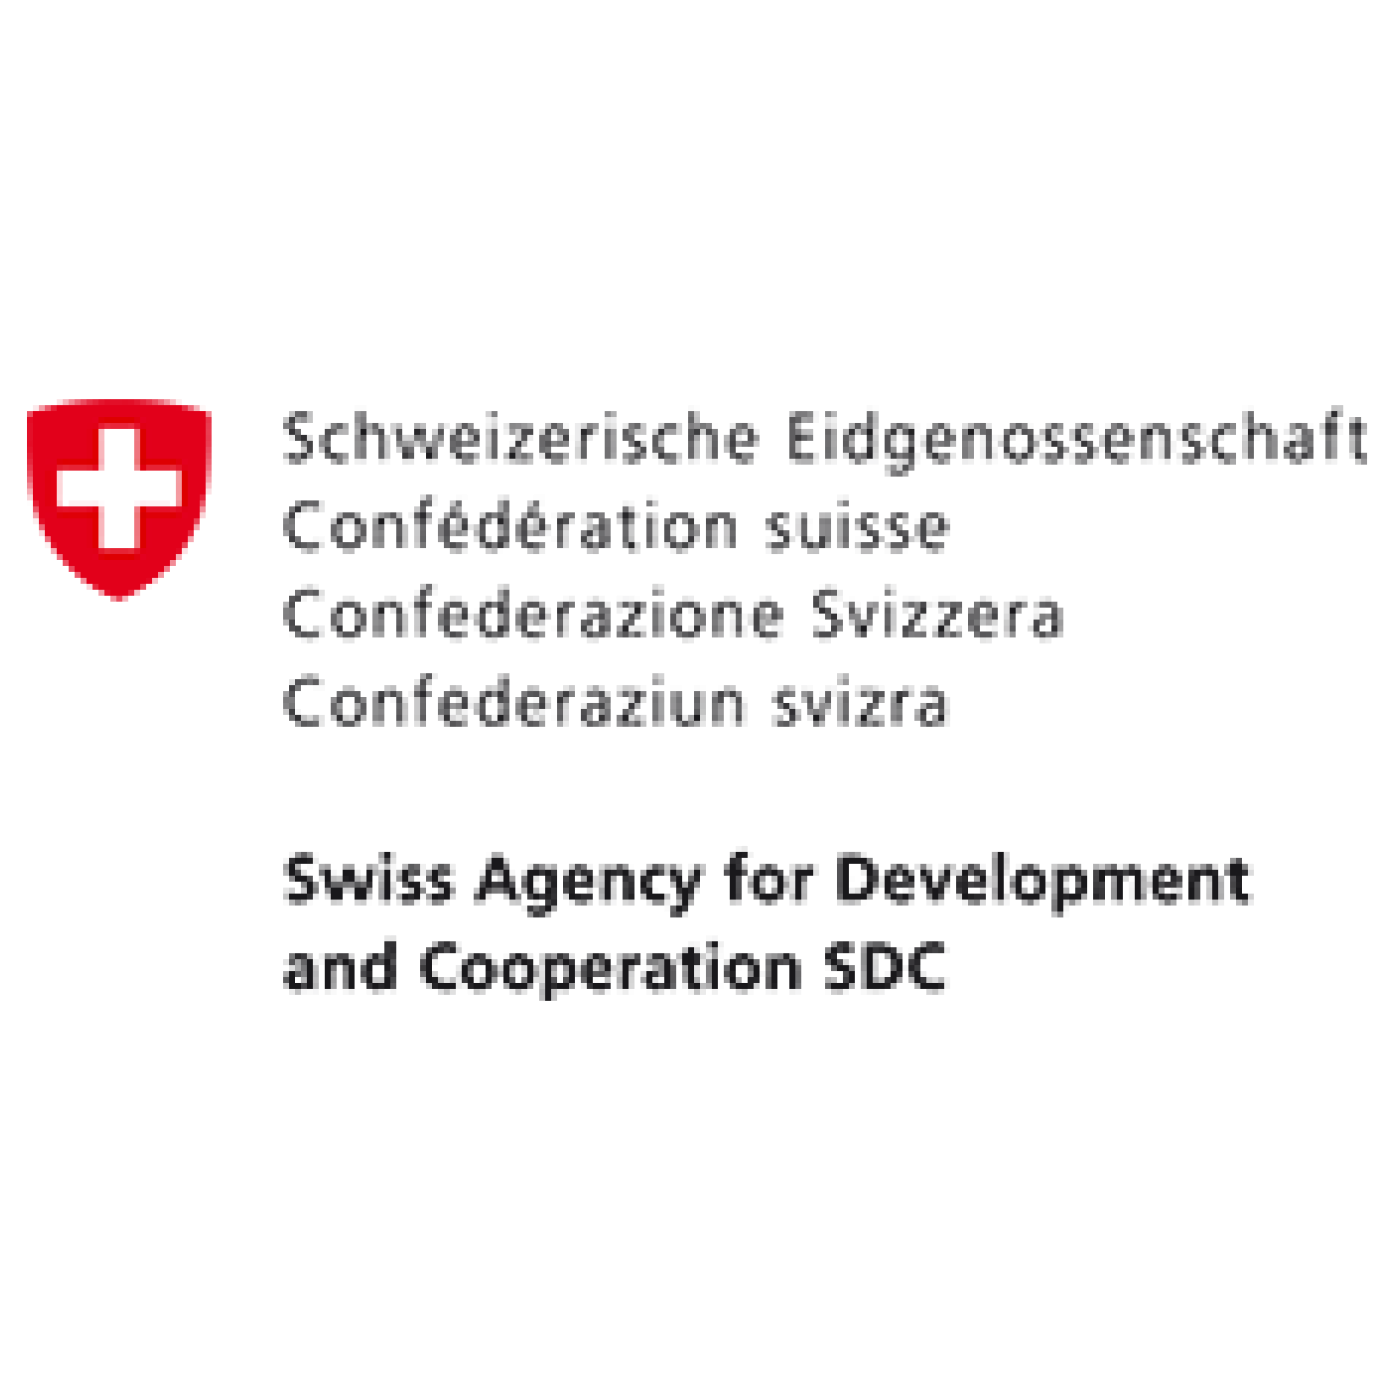 Swiss Development and Cooperation Agency (SDC) logo